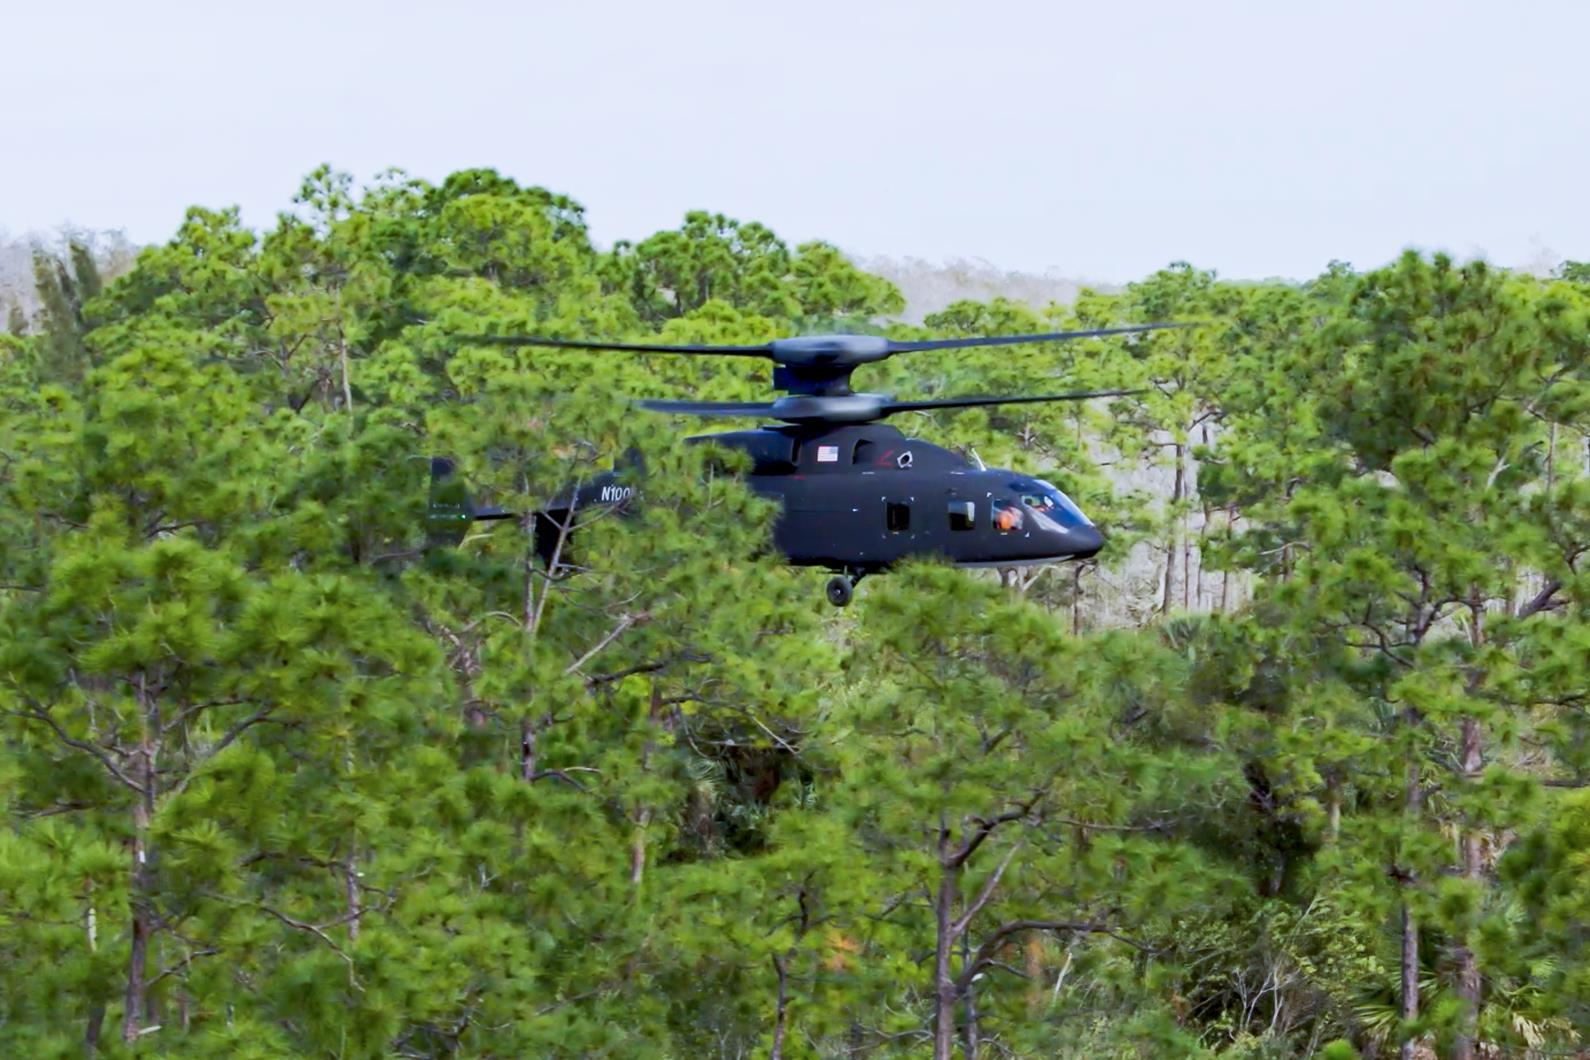 DEFIANT Technology Demonstrator recently executed a confined area landing among the trees in south Florida as part of the Lockheed Martin Sikorsky-Boeing team’s effort to validate aircraft design and relevance to the Army’s Future Long Range Assault Aircraft mission profile. (Lockheed Martin Sikorsky-Boeing photo)